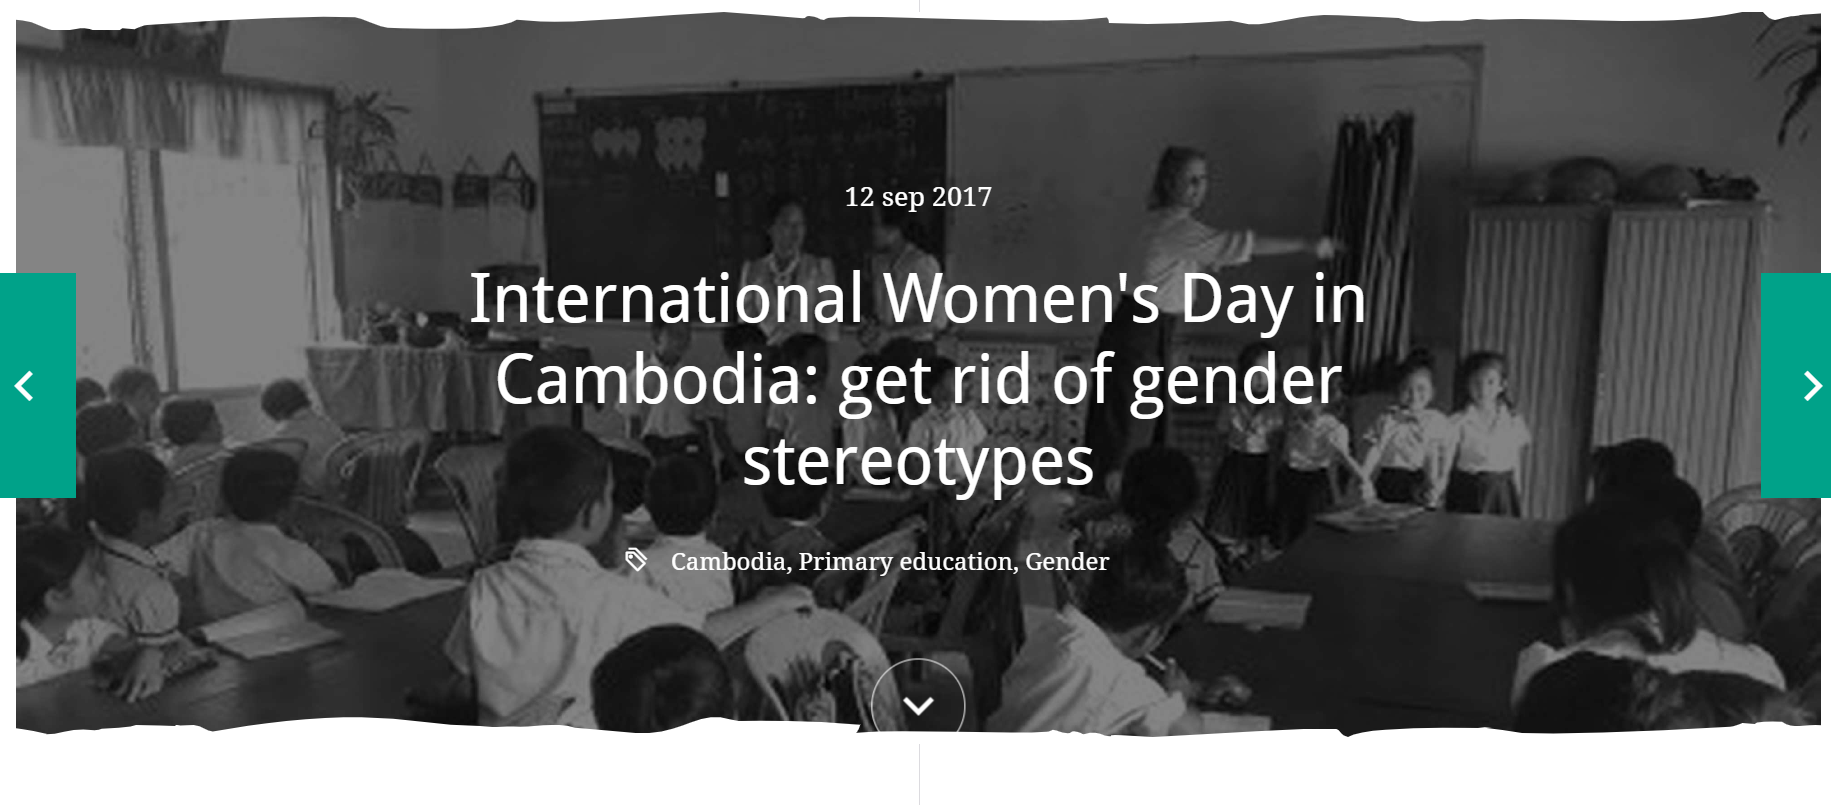 International Women's Day in Cambodia: get rid of gender stereotypes